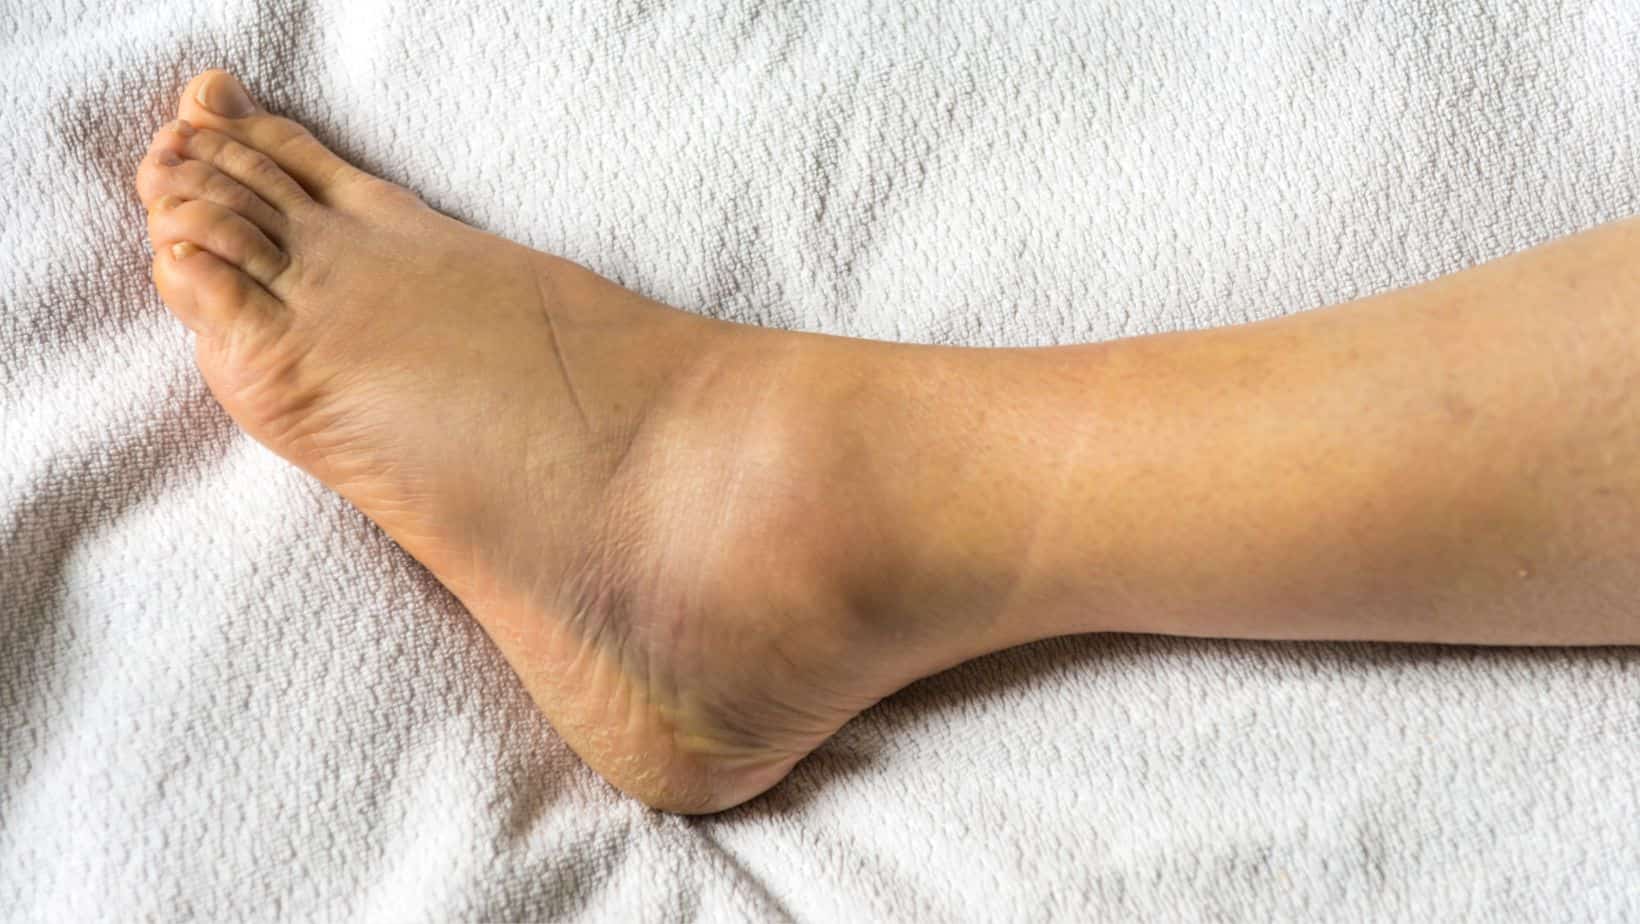 Cycling on a Swollen and Sprained Ankle Ankle sprains can cause serious long-term damage